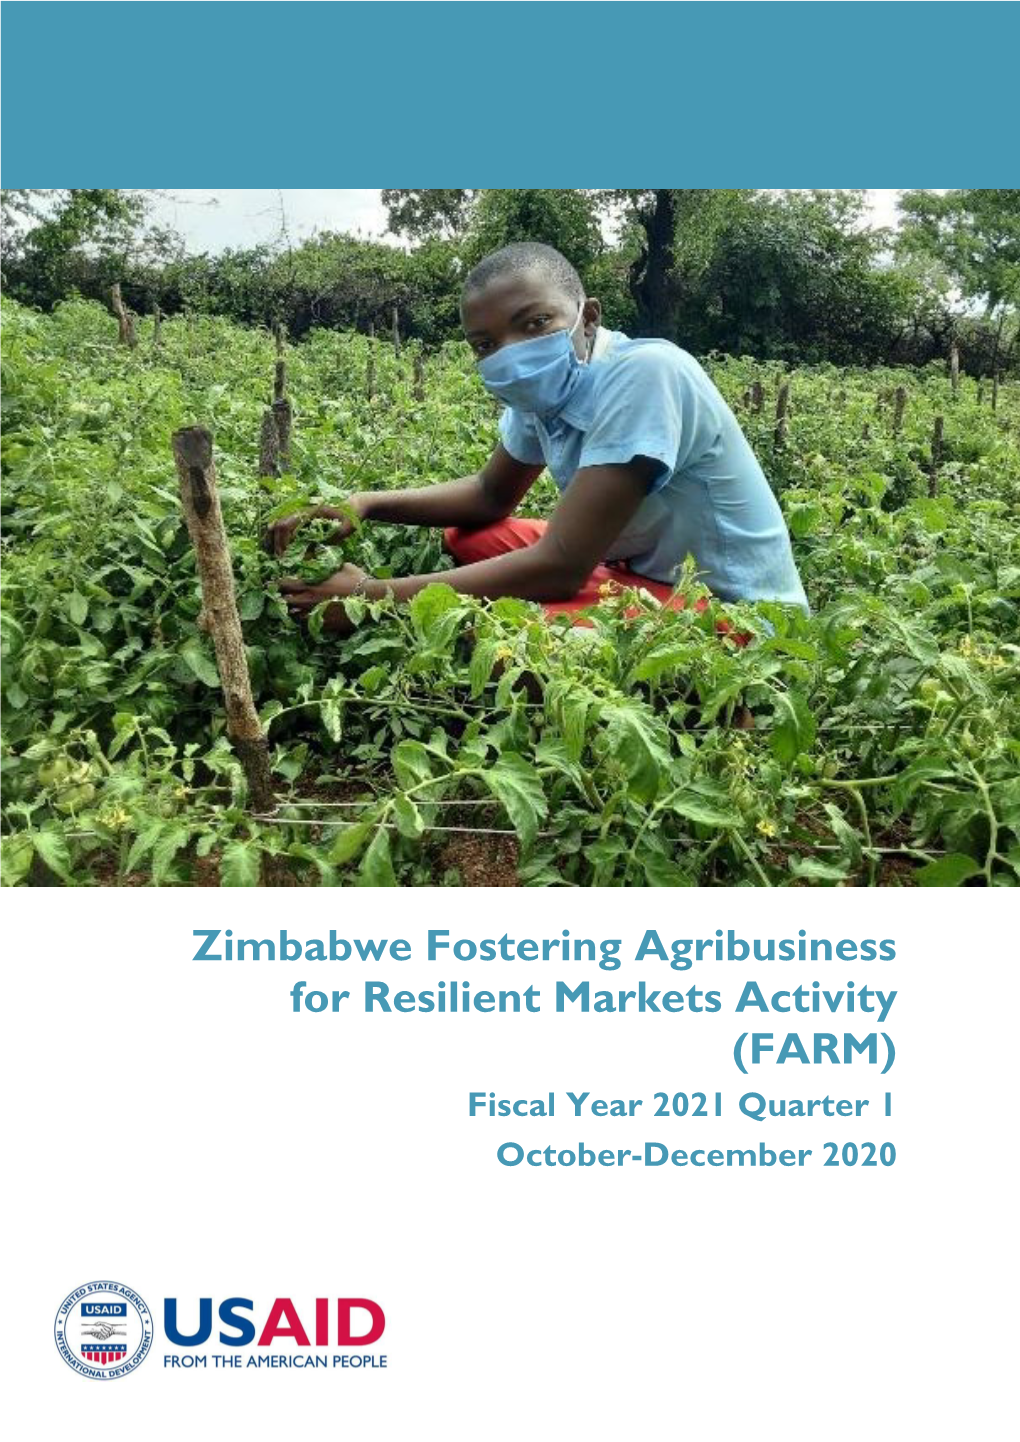 Zimbabwe Fostering Agribusiness for Resilient Markets Activity (FARM) Fiscal Year 2021 Quarter 1 October-December 2020